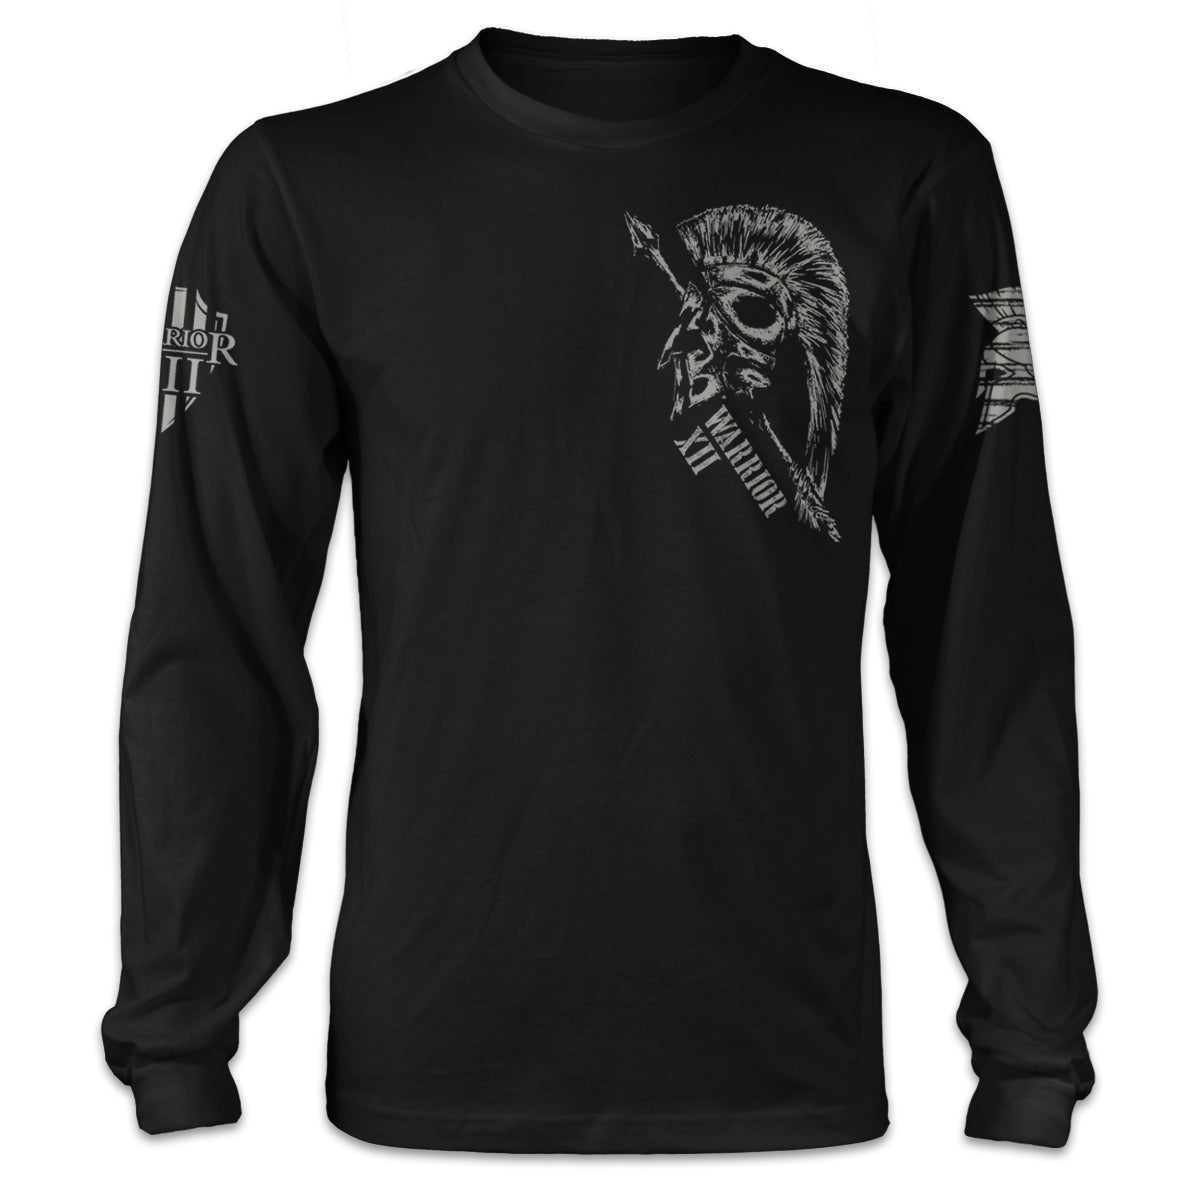 A black long sleeve shirt with a spartan helmet with an arrow through it printed on the front of the shirt.